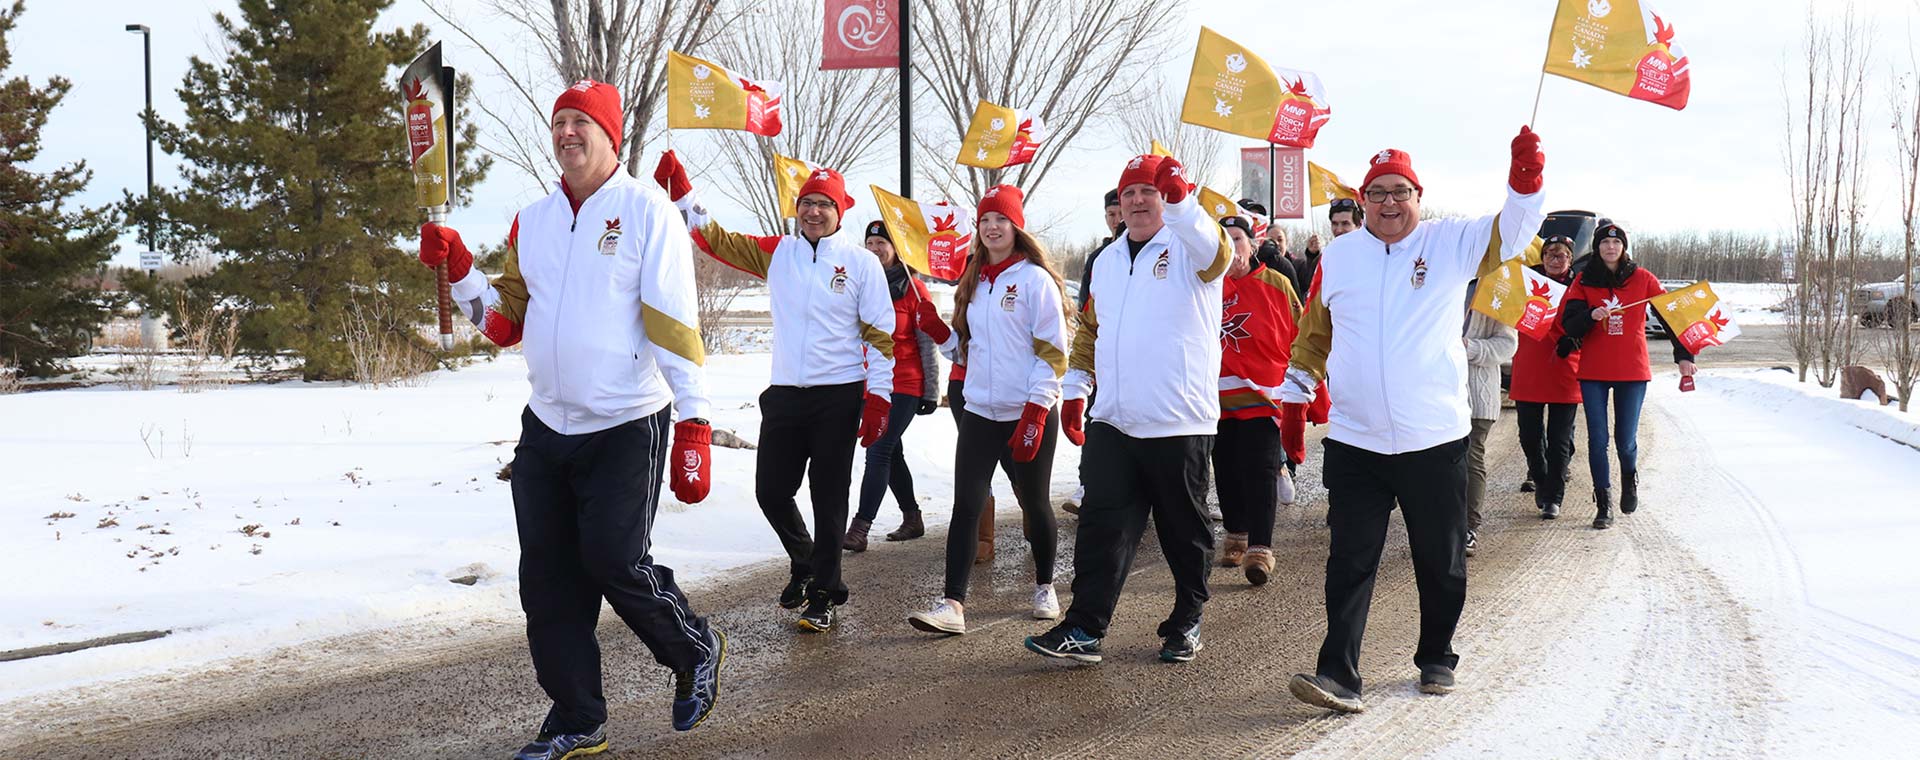 A crowd of people are on a walking path, wearing white long-sleeved tops, red toques and mittens. Some are wavy flags. The leader is carry the Winter Games torch.